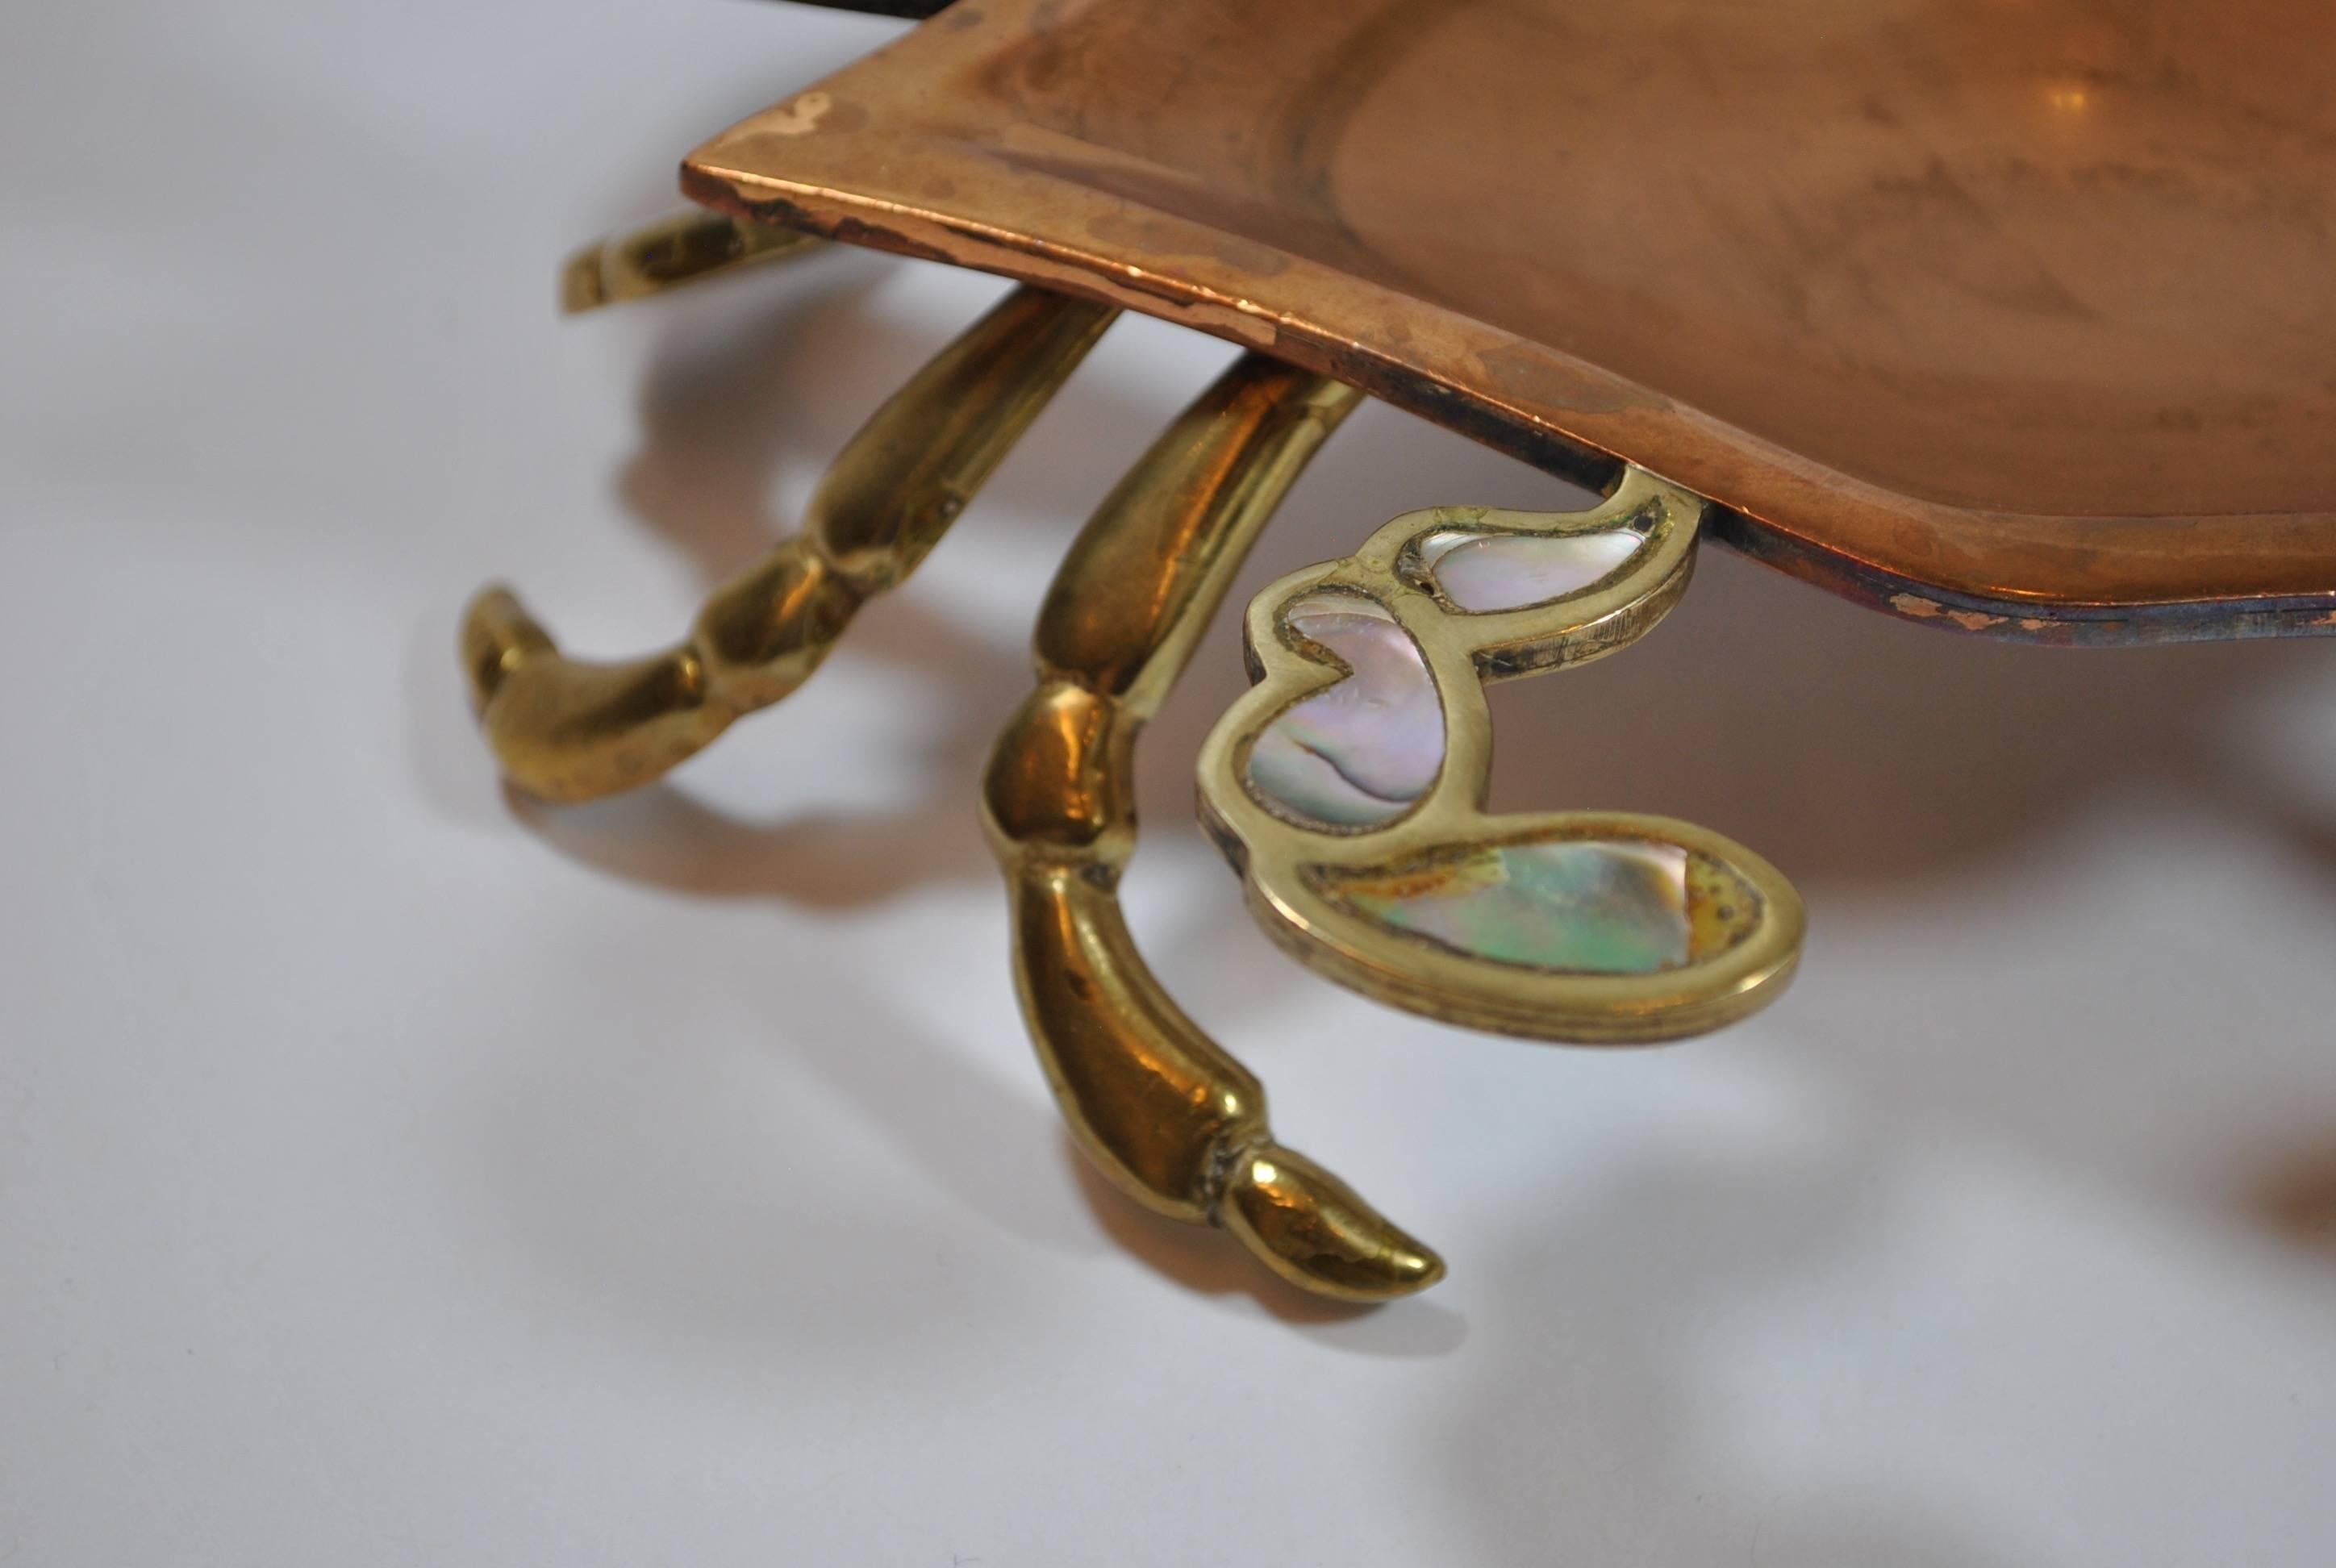 Metales Casados (Mixed metals): brass and copper with details of Abalone tray in the shape of a crab elaborated by “Los Castillo” workshop in Taxco, Guerrero, Mexico. 

“Los Castillo” workshop was established by three Castillo brothers: Miguel,